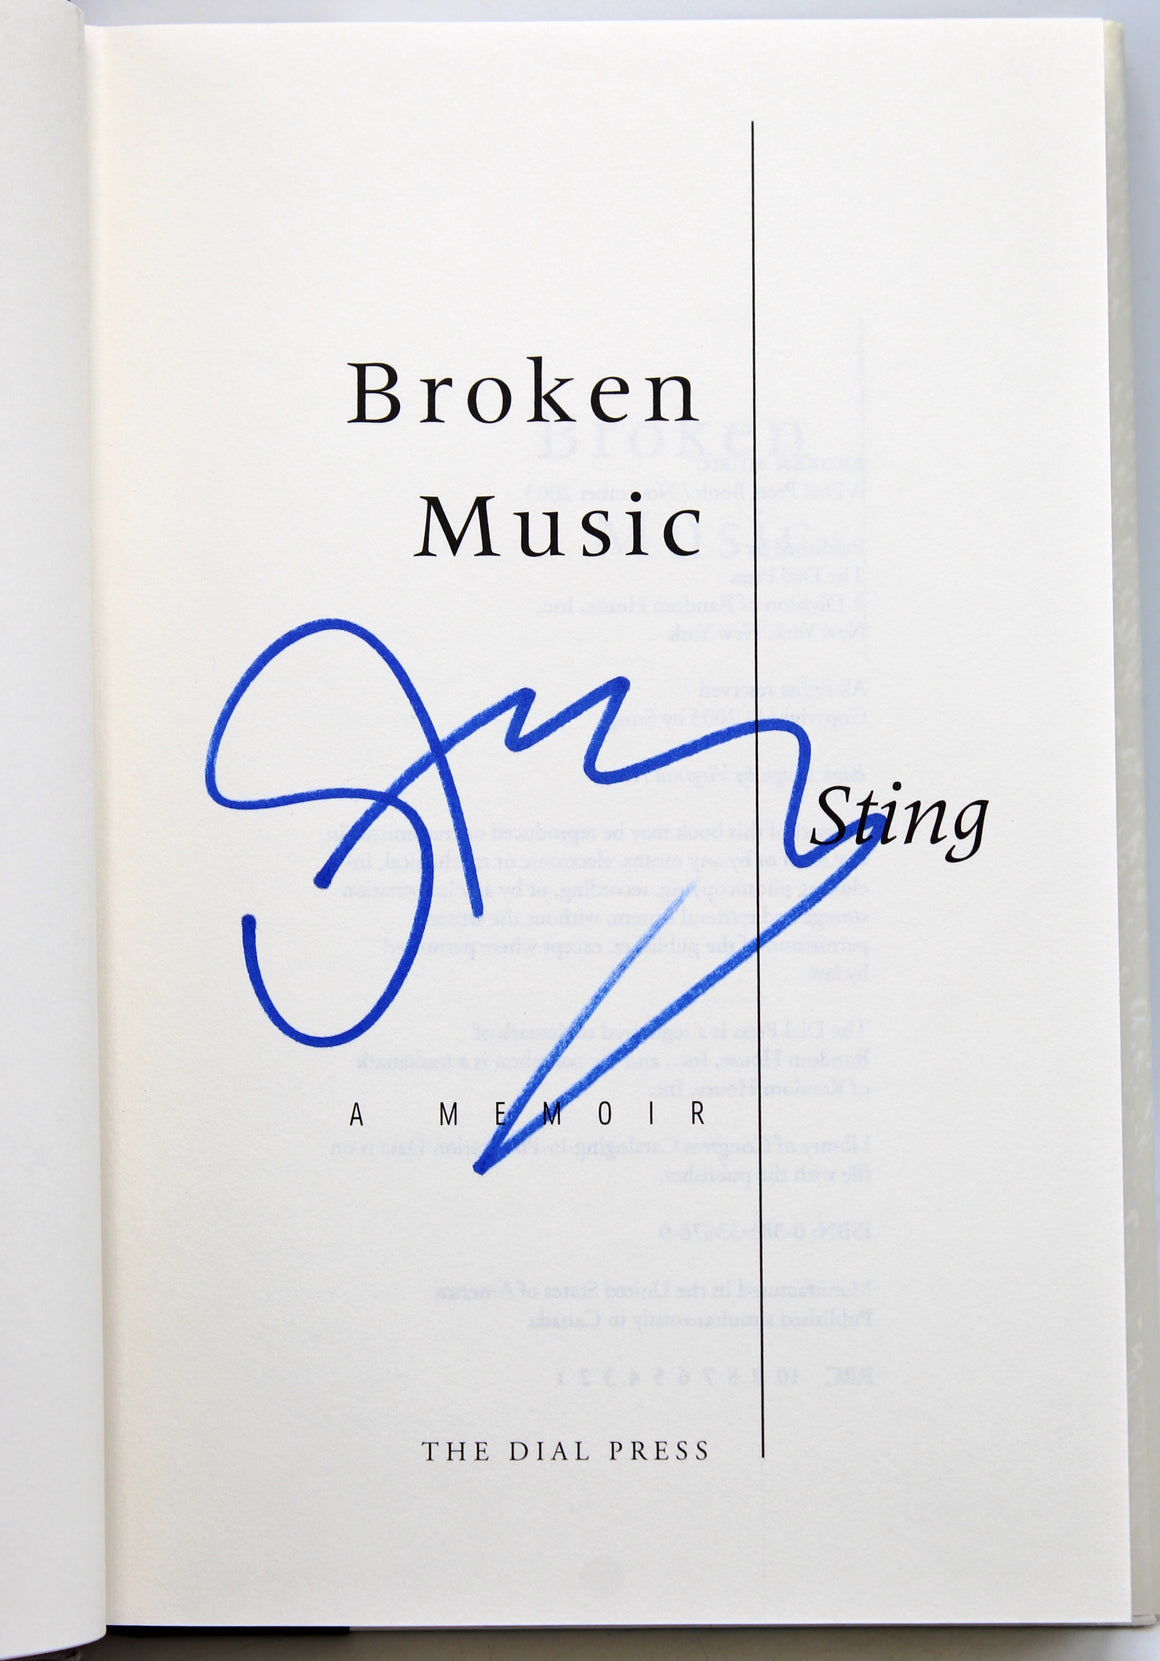 Broken Music, Signed by Sting, First Edition, 2003